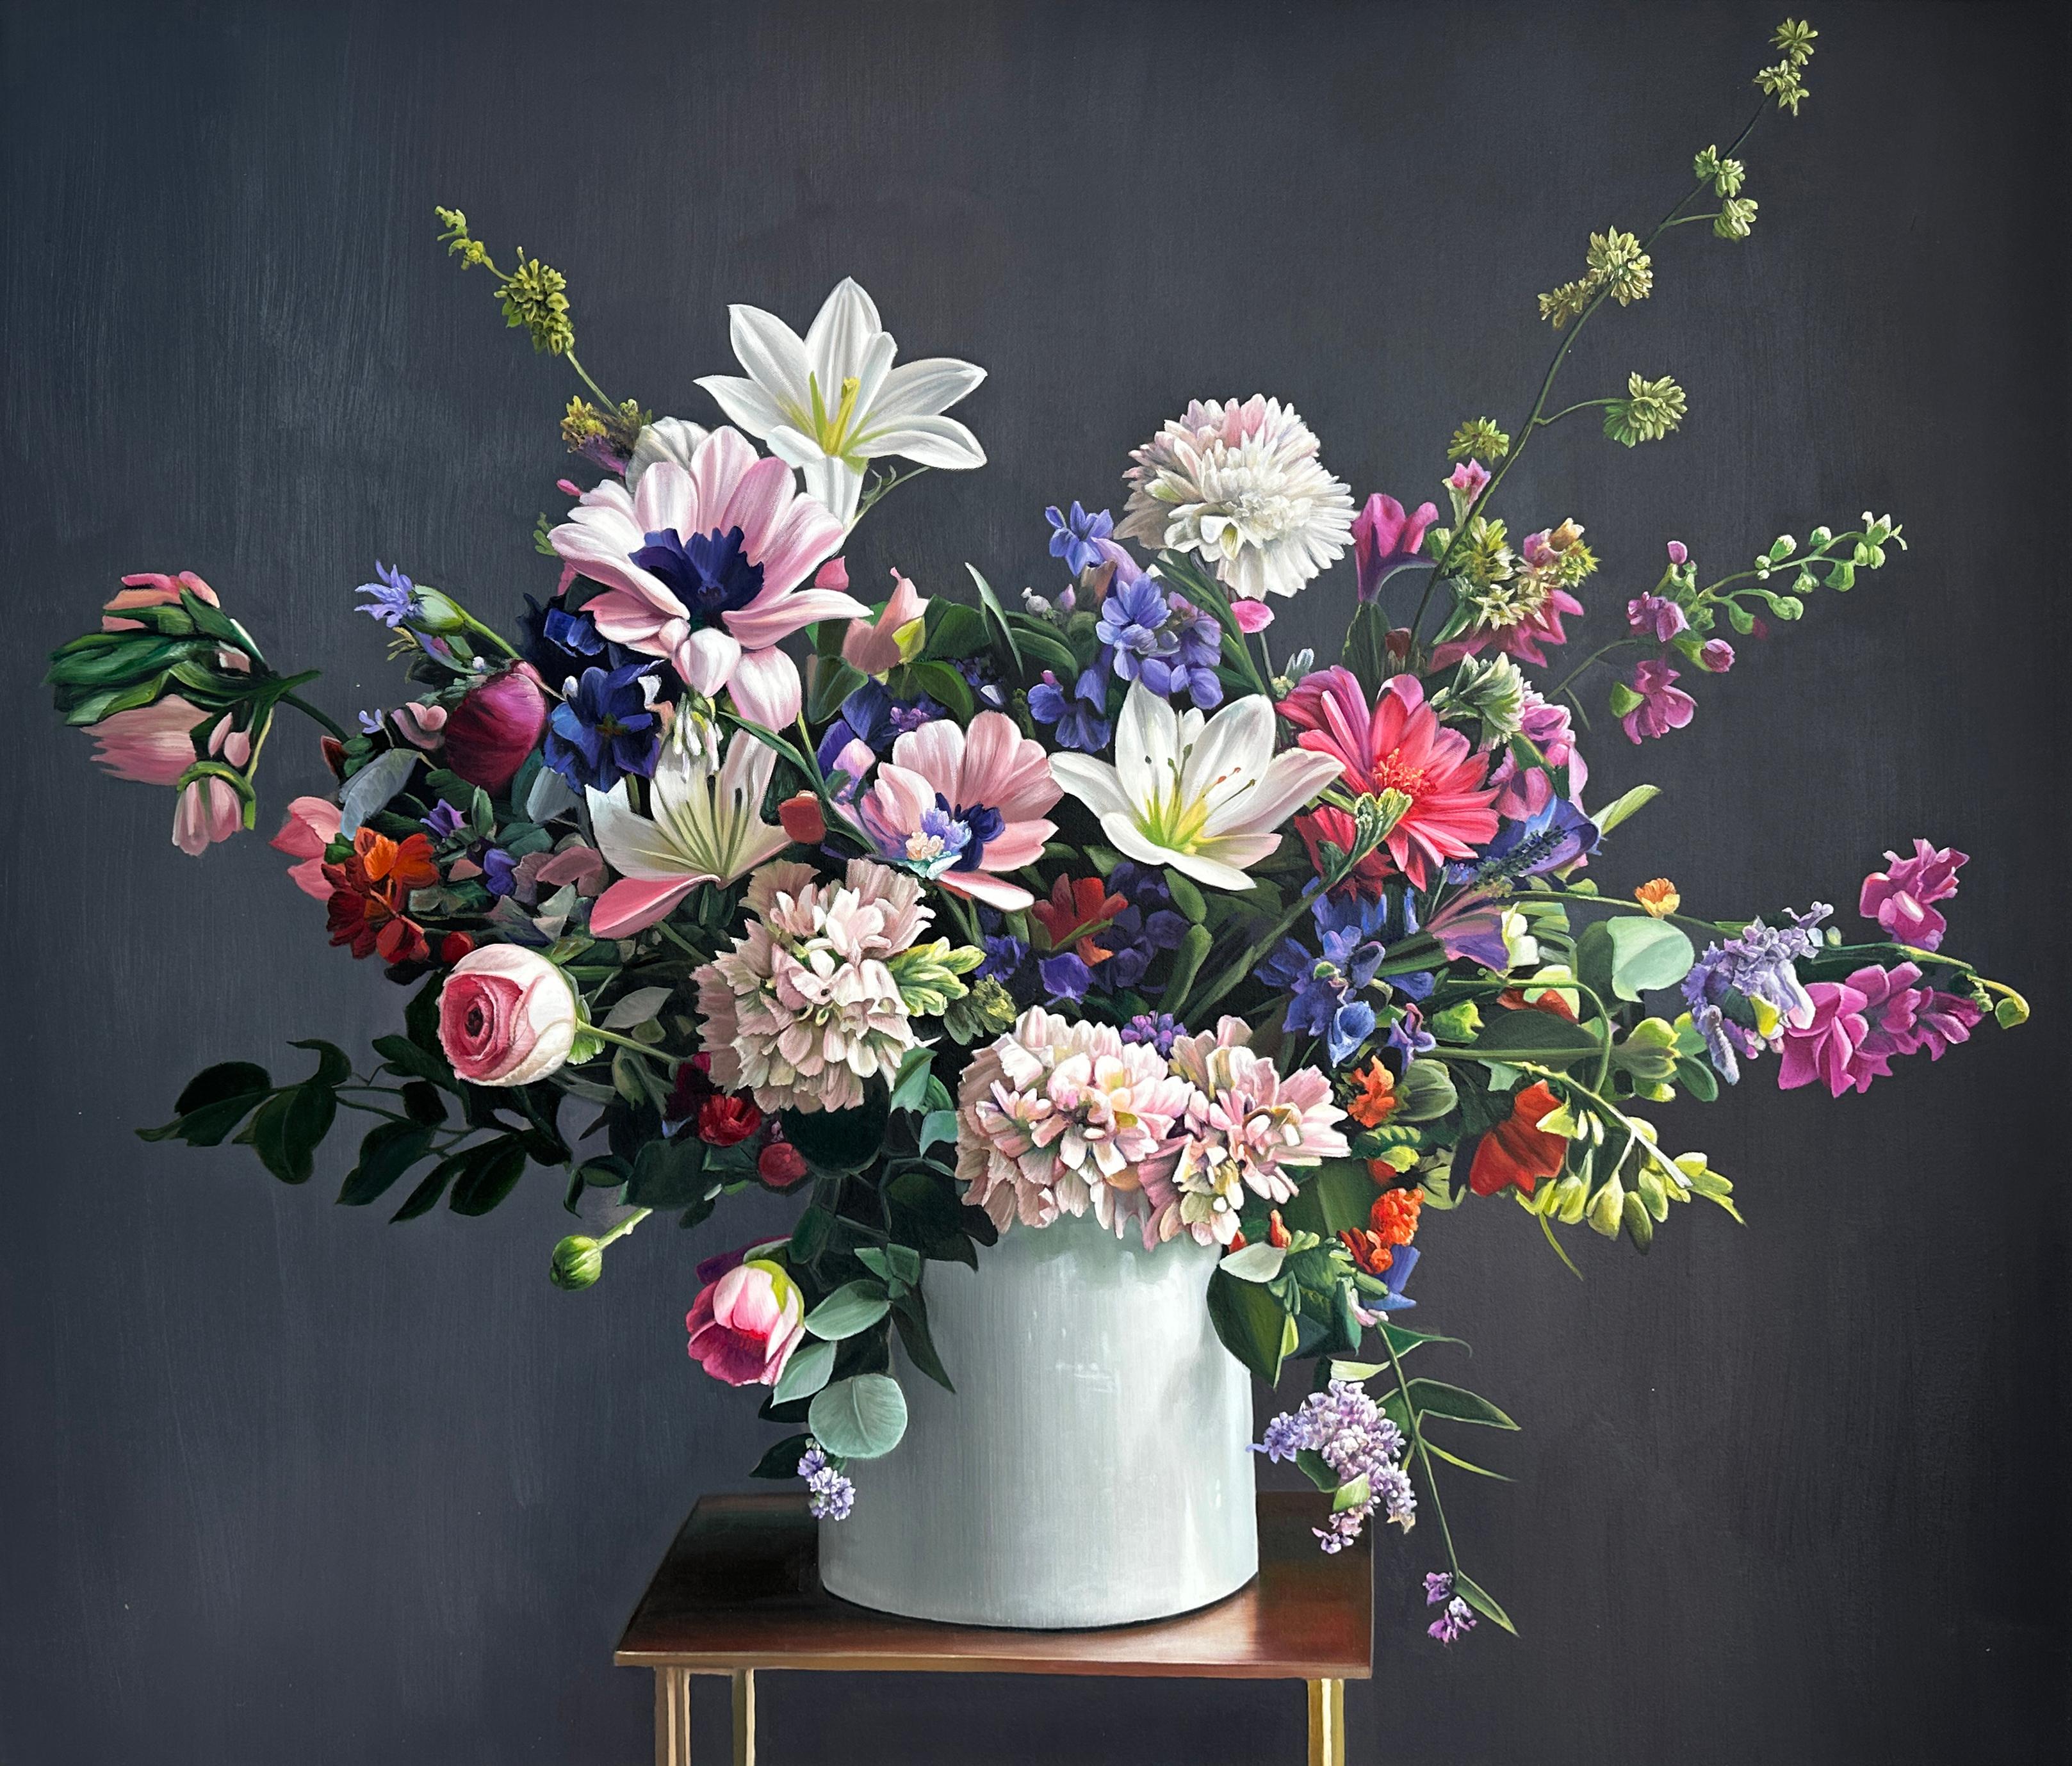 Trough the pale twilit meadow by K Husslein Botanical Hyperrealistic Still life  - Painting by Katharina Husslein